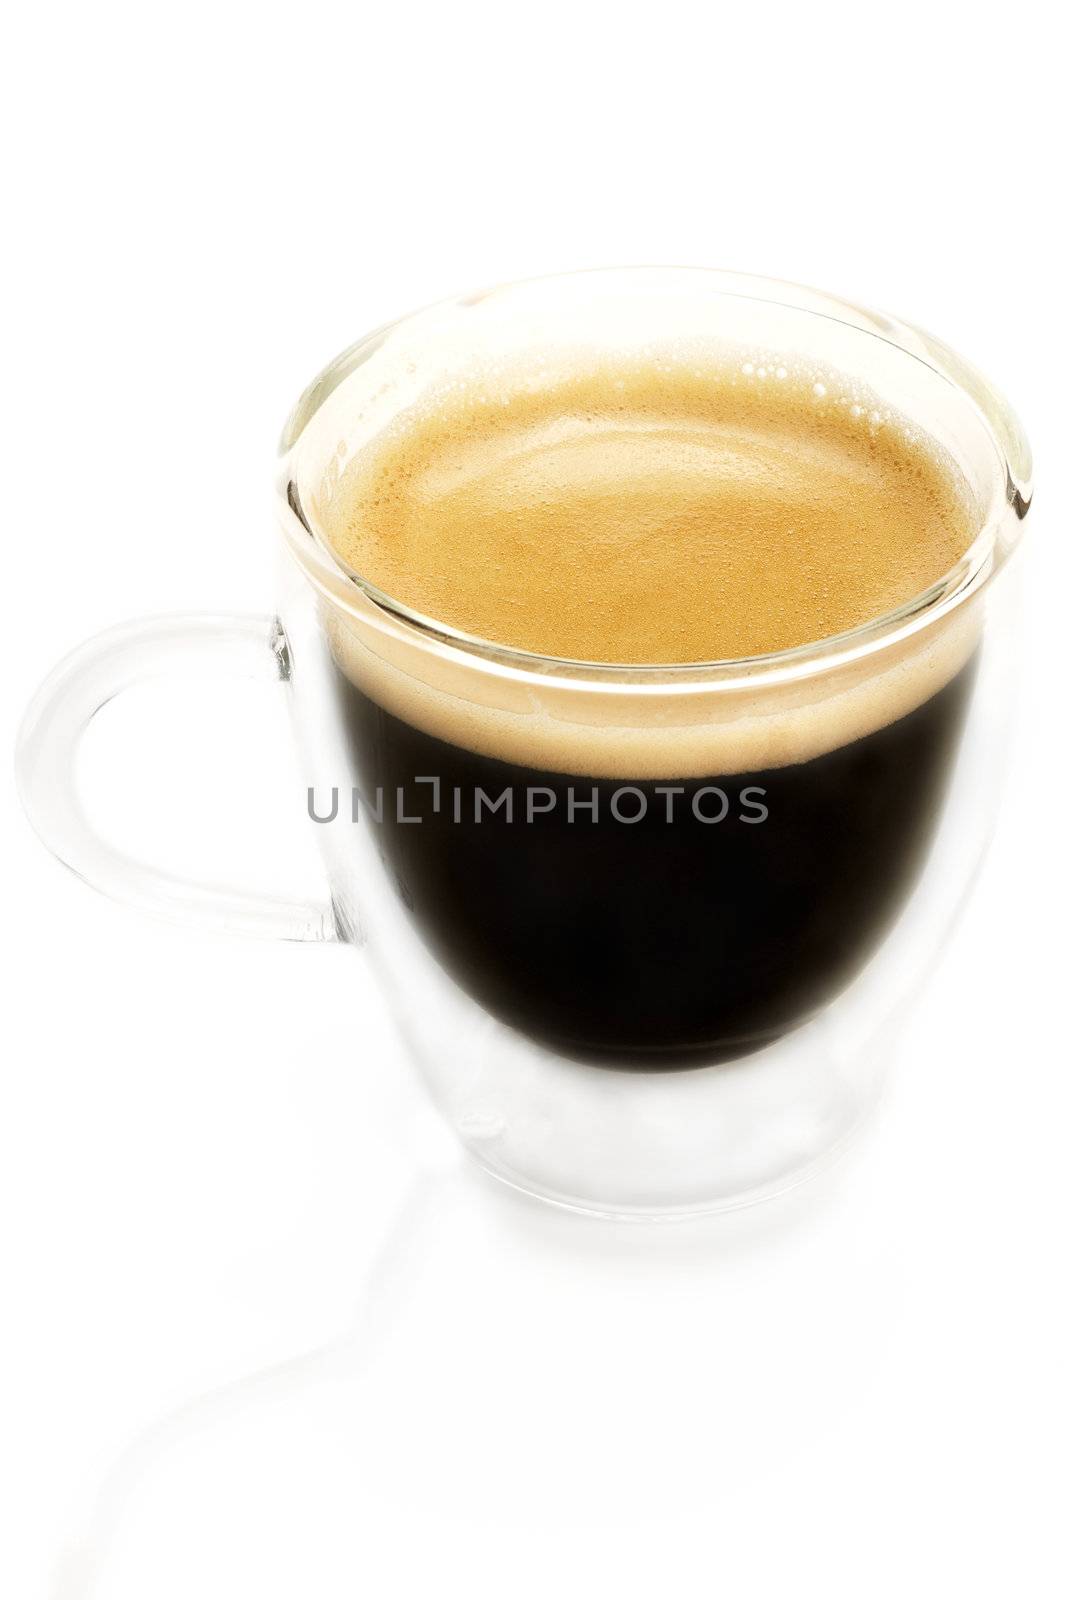 espresso coffee in a glass cup from slightly top on white background